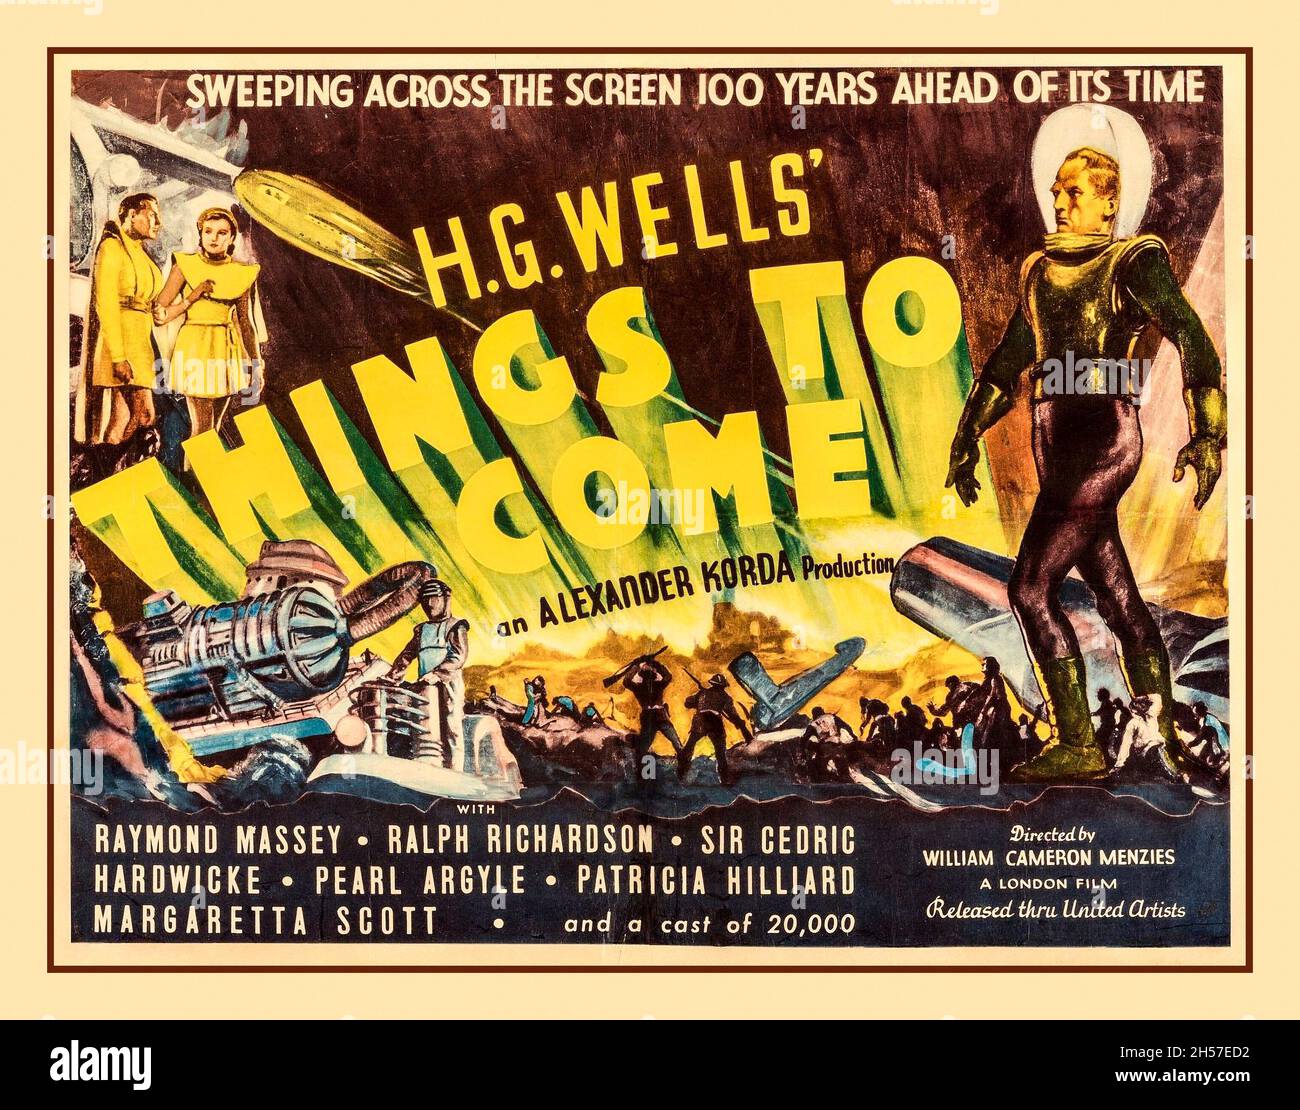 Vintage Film Movie Poster for H G Wells THINGS TO COME 1936.  Alexander Korda Production starring Raymond Massey Ralph Richardson United Artists Stock Photo